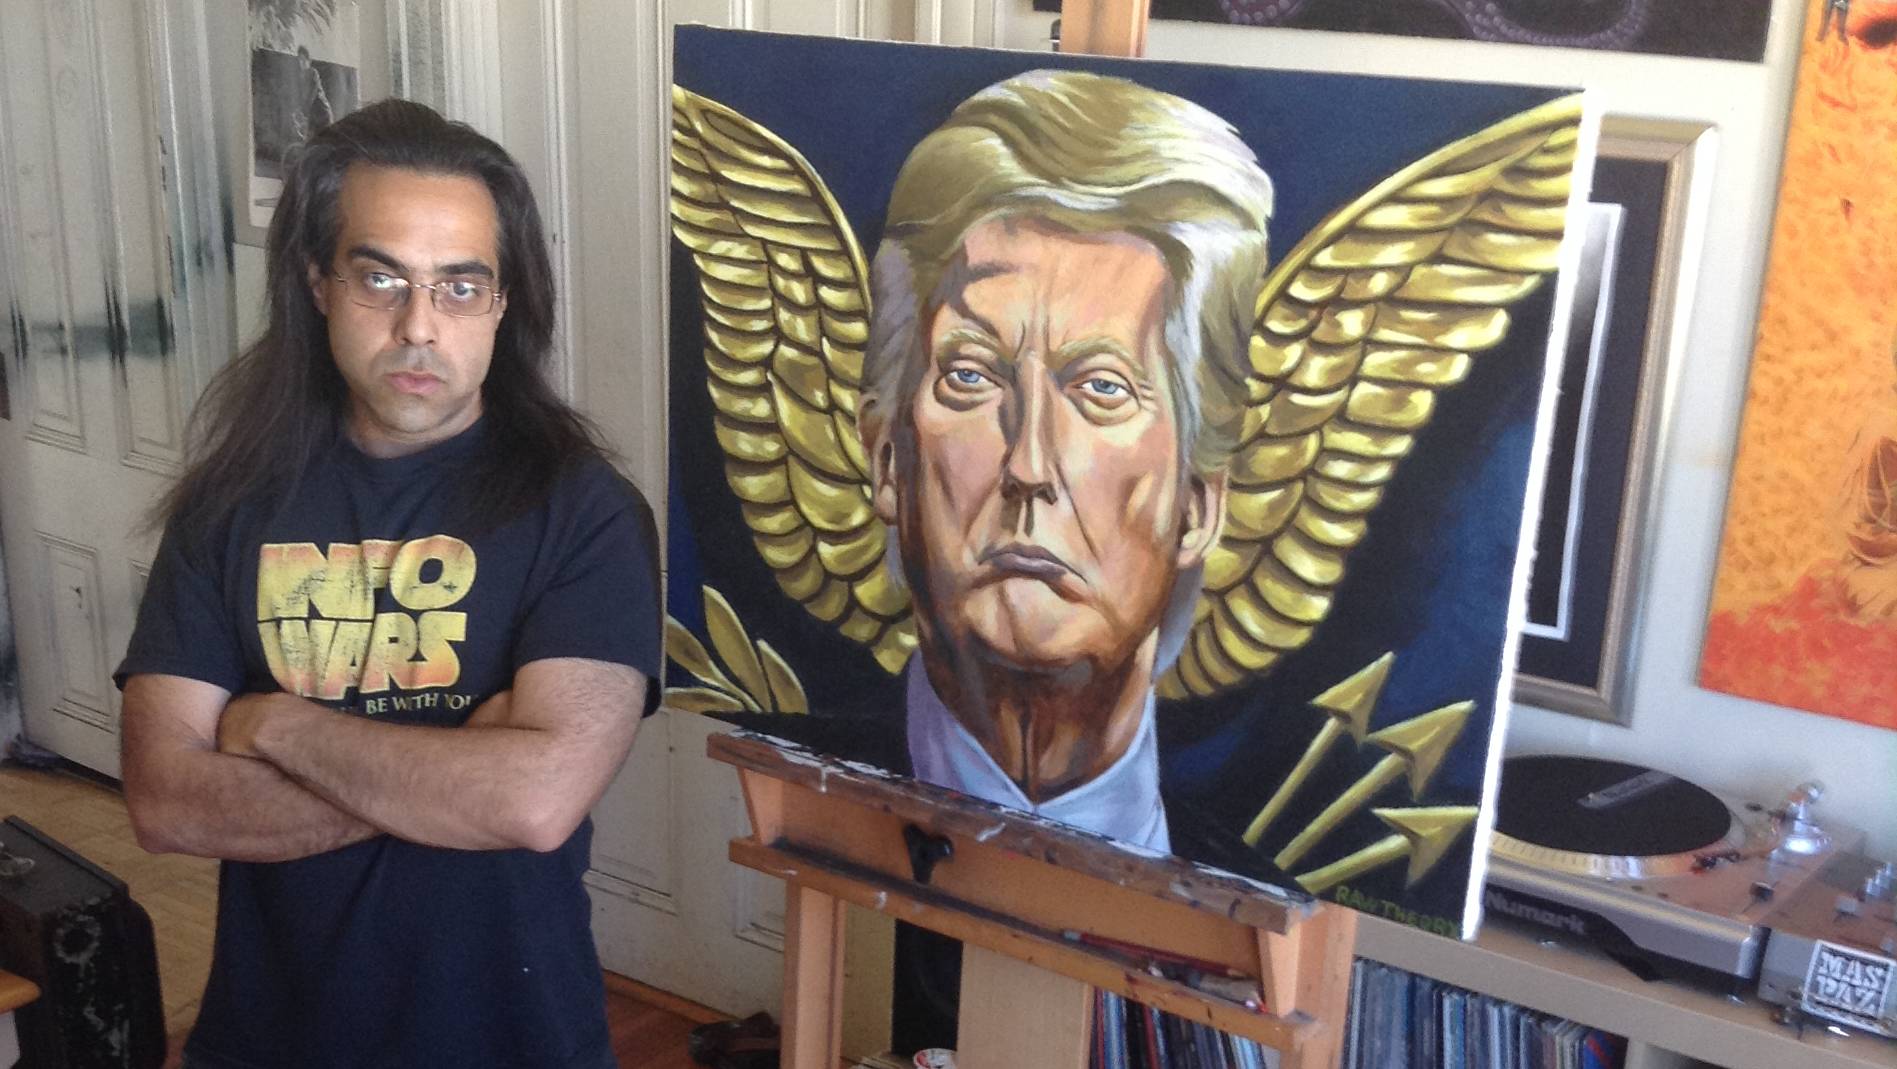 Oakland artist Jon Proby poses with his painting ‘POTUS and me’.